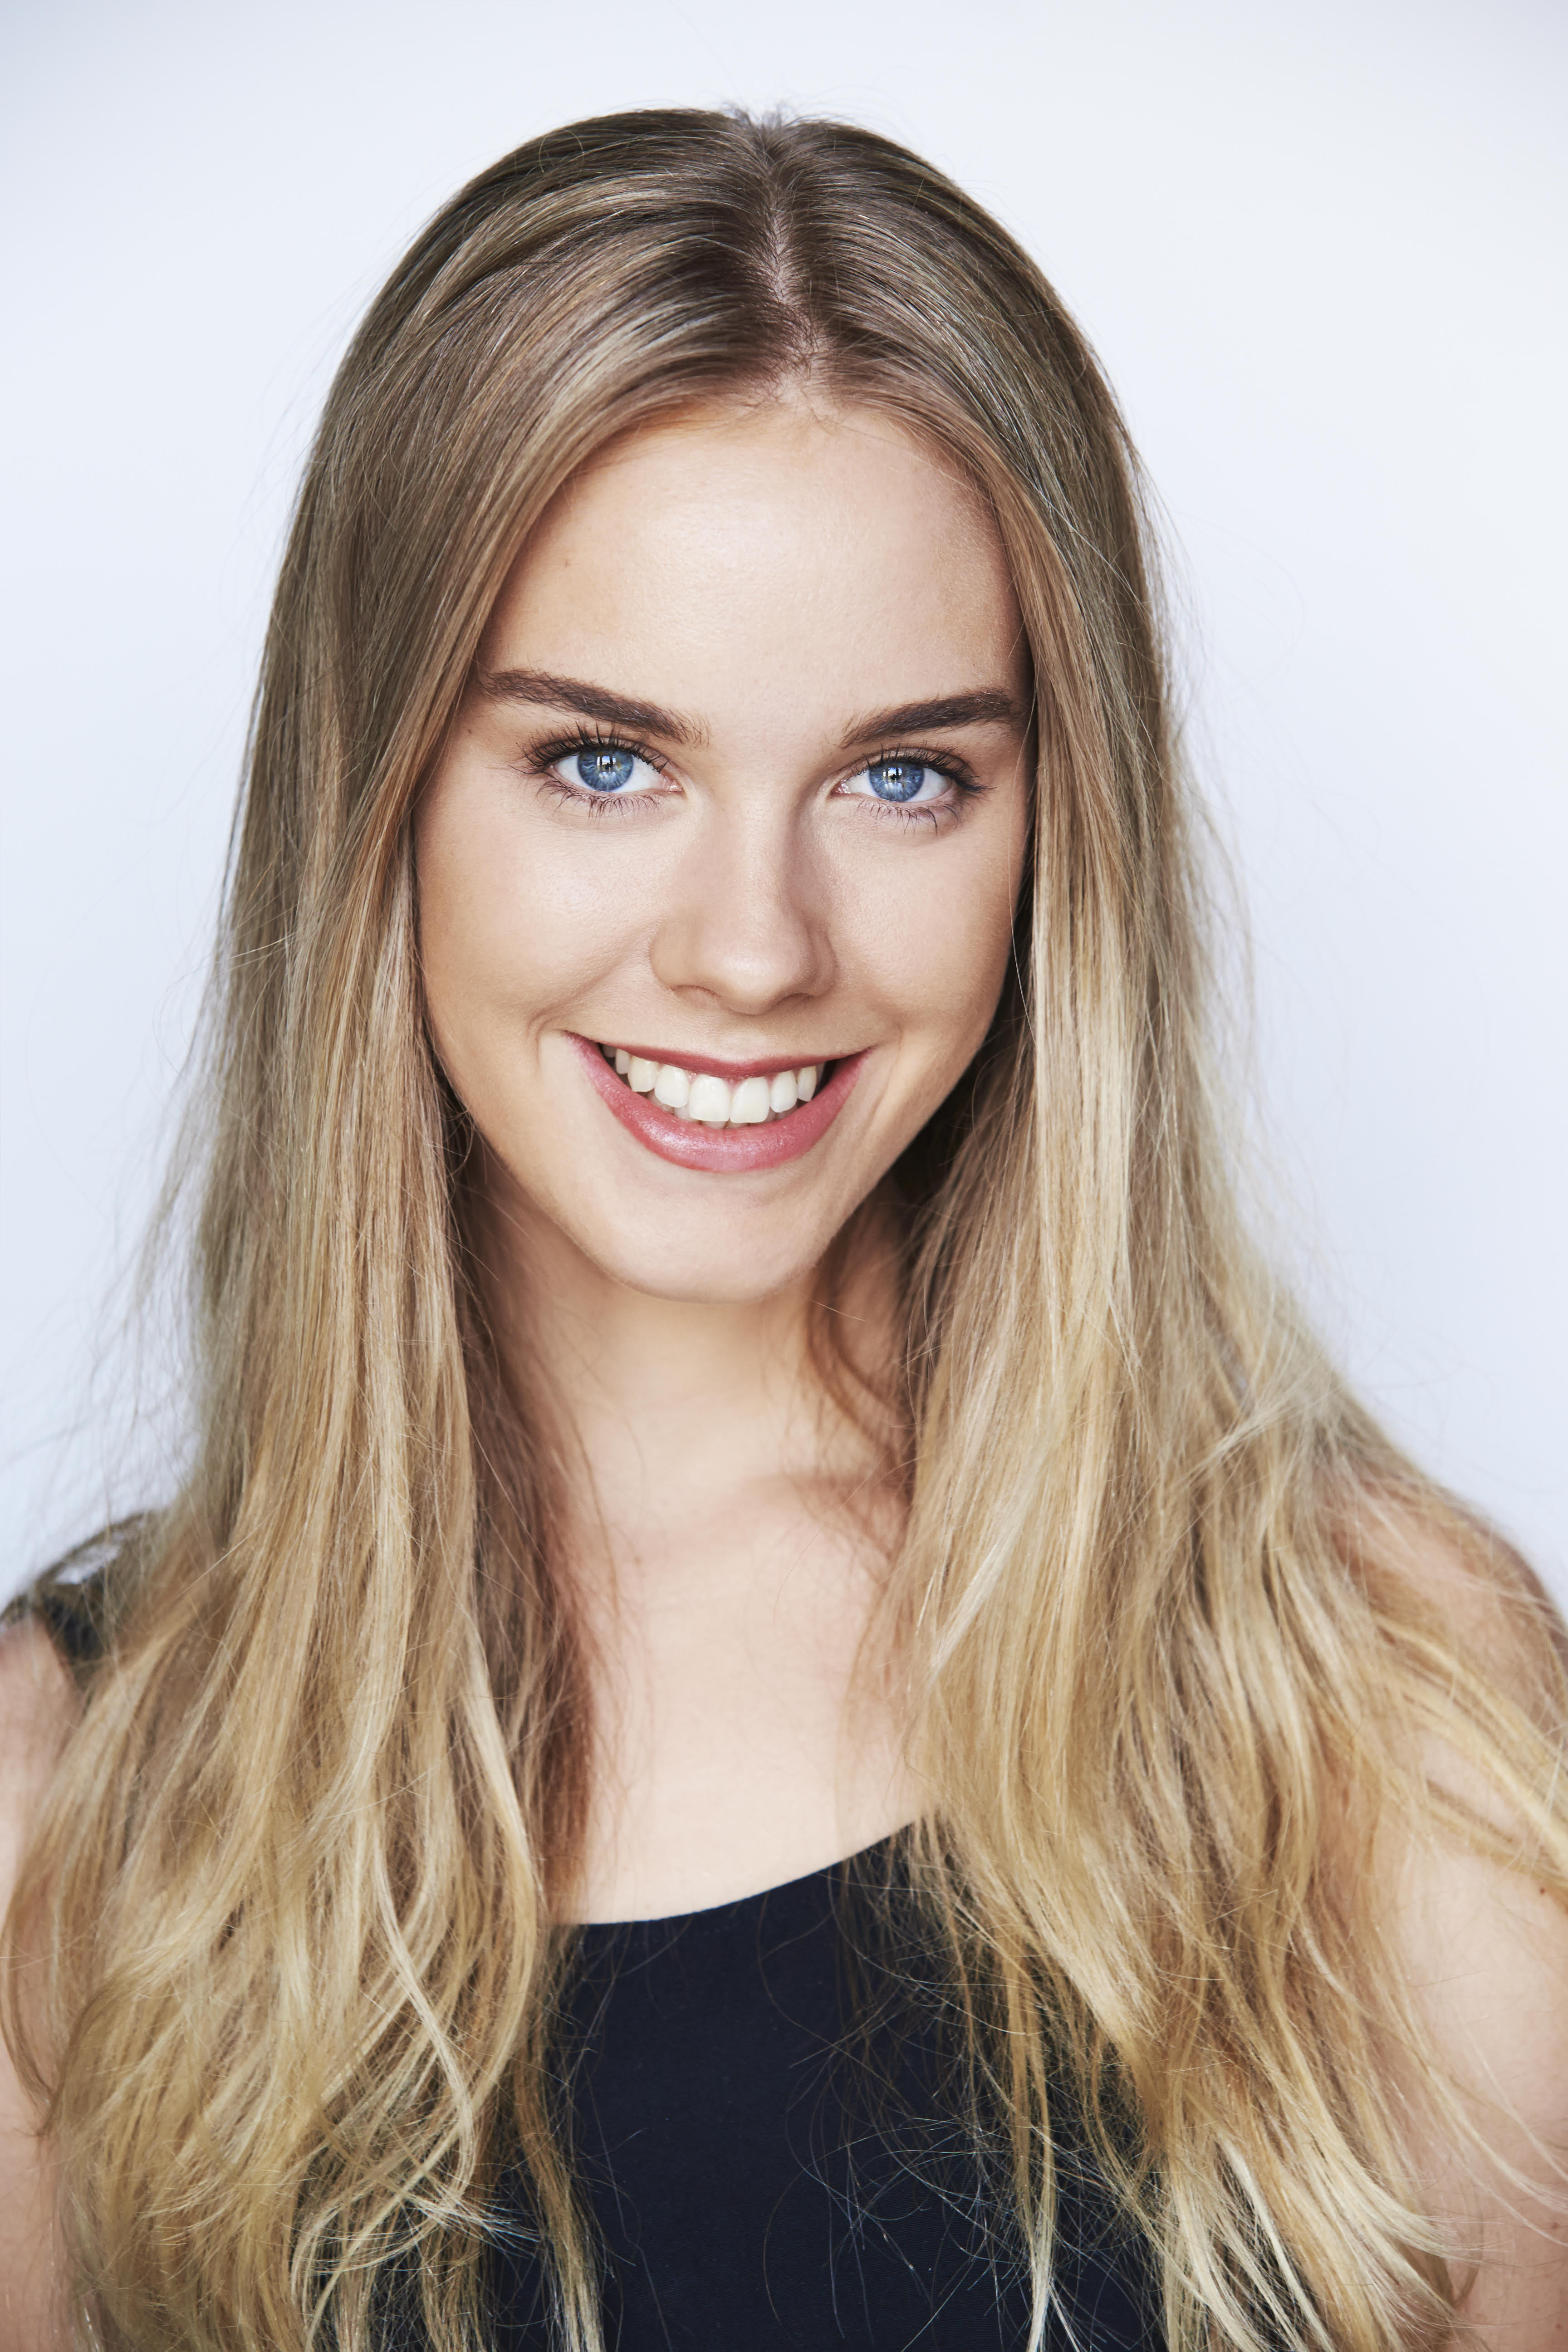 Cosmo Beauty Writer Amelia Bowe shares tips for perfect Brows!